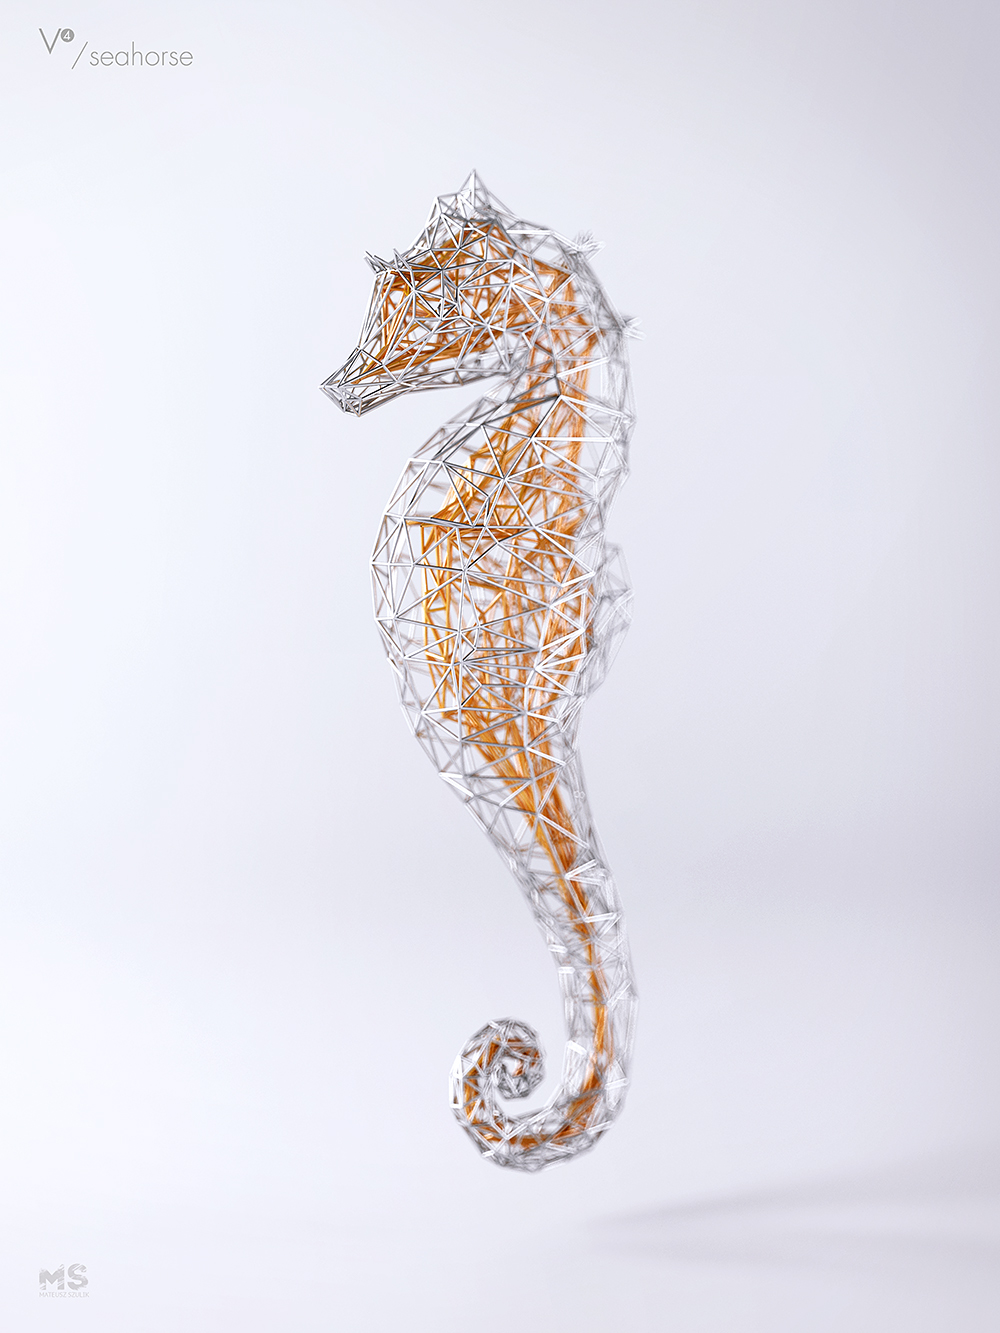 Wires wire sculpture animal concept beauty seahorse swan template sale